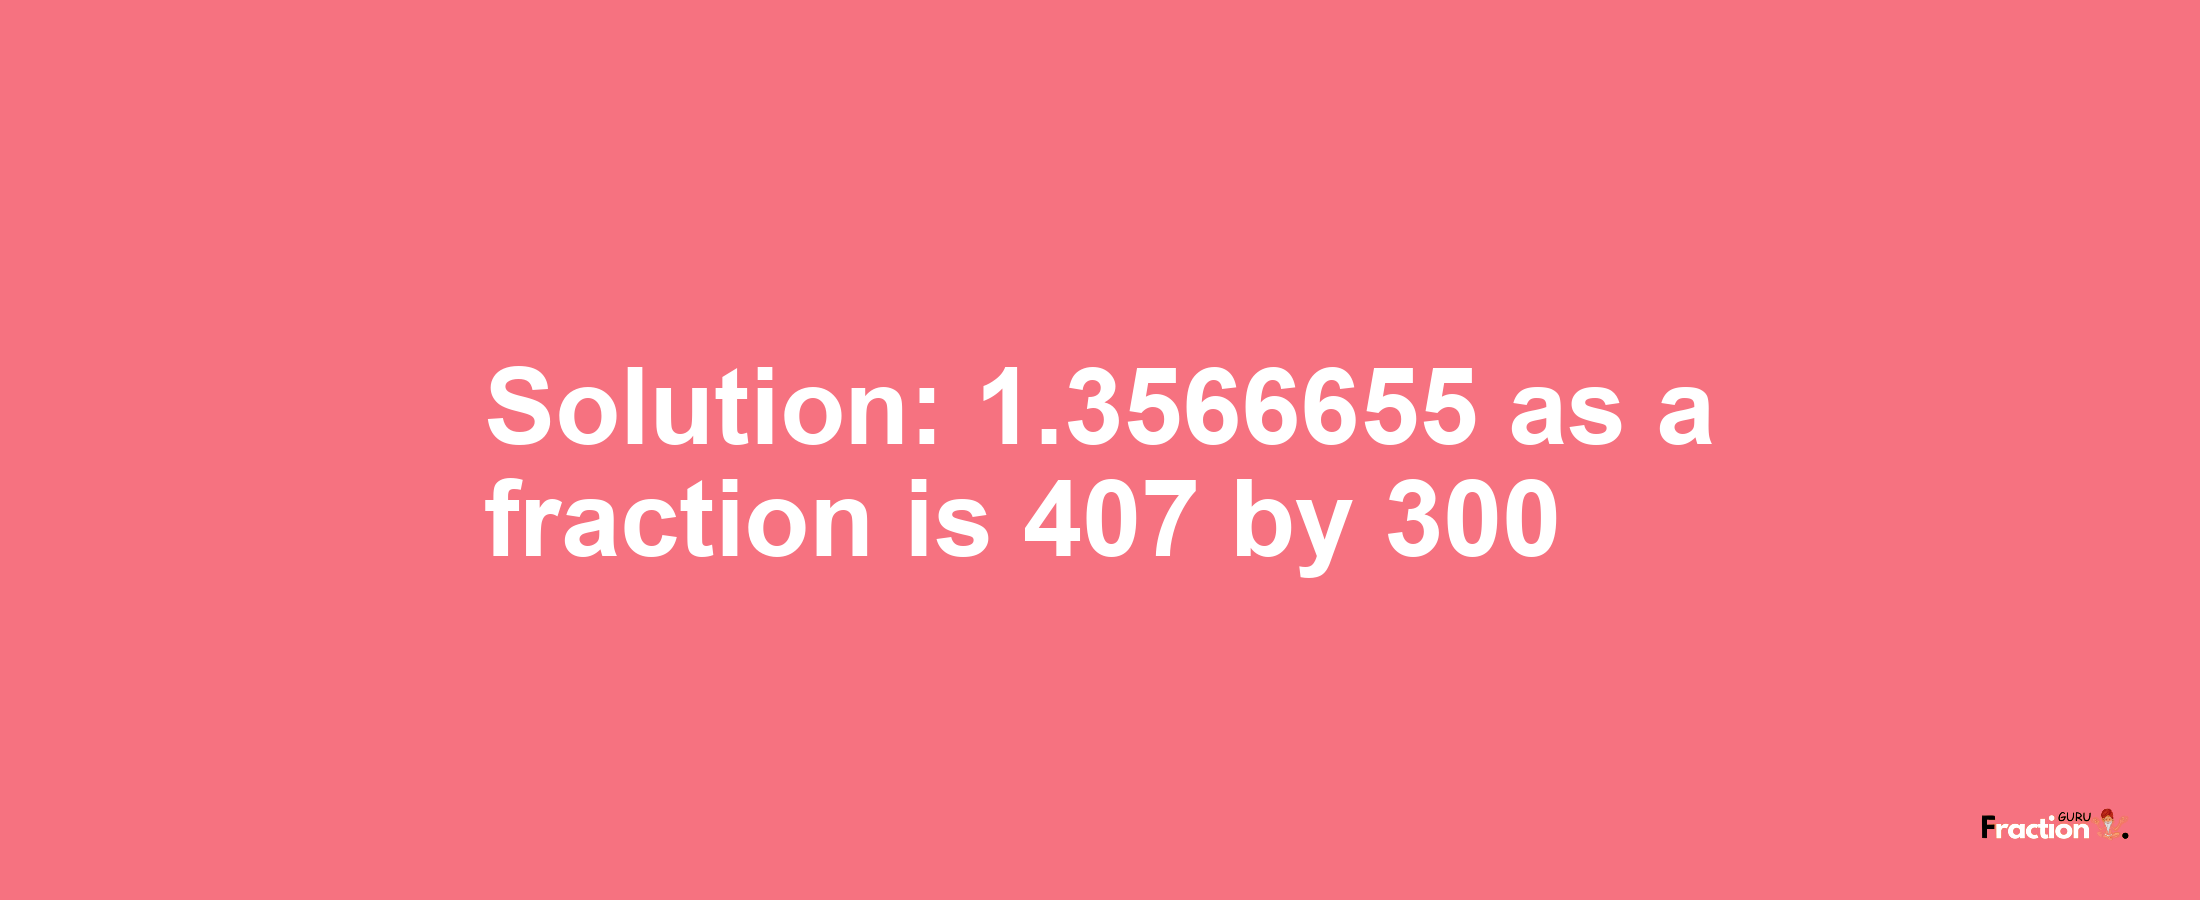 Solution:1.3566655 as a fraction is 407/300